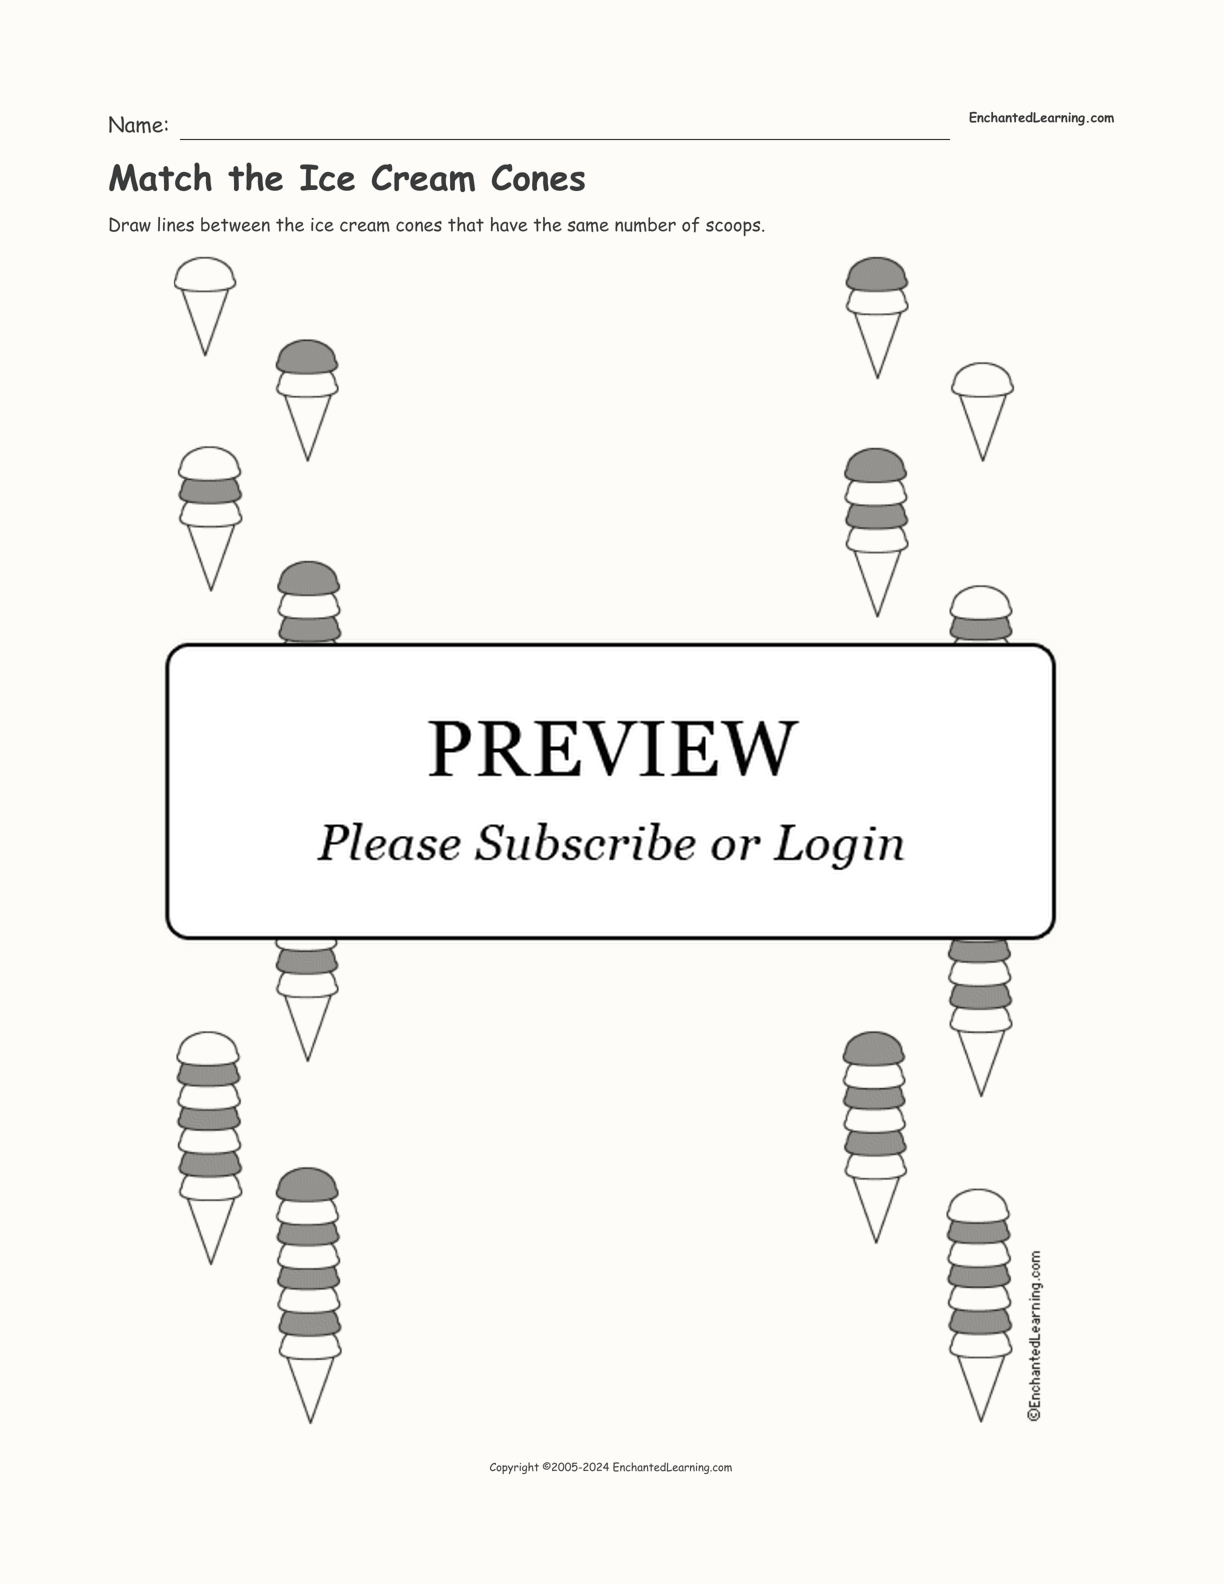 Match the Ice Cream Cones interactive worksheet page 1